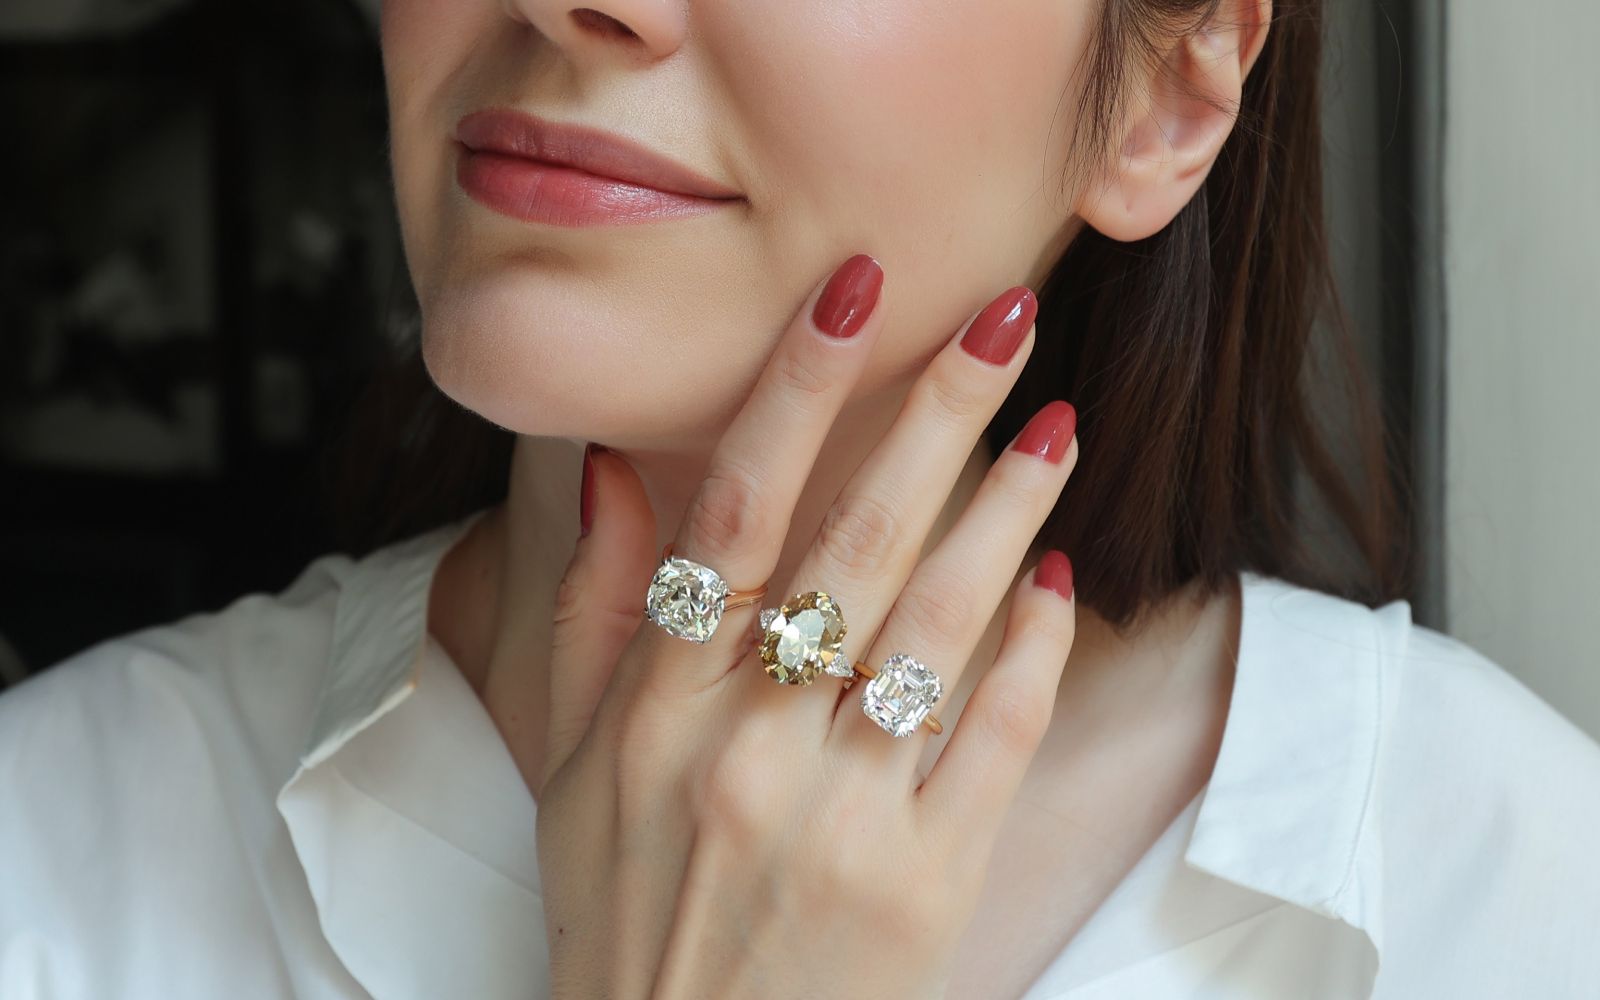 Katerina Perez wearing a selection of Antique rings at Hancocks including a 13.06-ct Old Mine Cushion-cut diamond Solitaire ring, an11.15-ct Fancy Deep colour Old-cut oval diamond ring, and a 9.01-ct Asscher-cut diamond Solitaire ring 